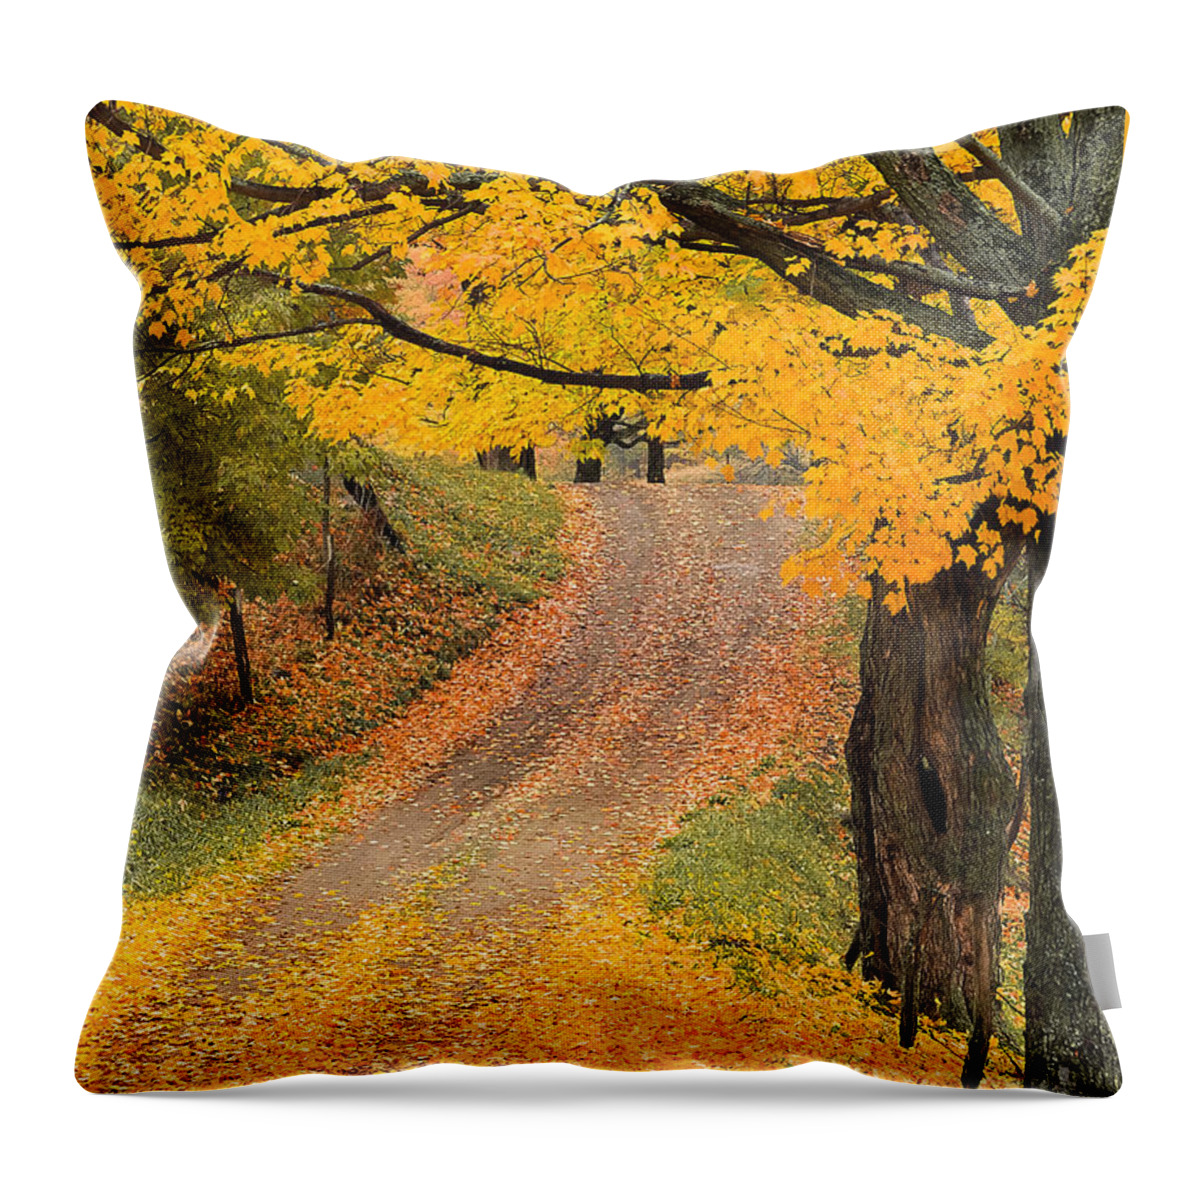 Fall Throw Pillow featuring the photograph Autumn Country Road by Alan L Graham